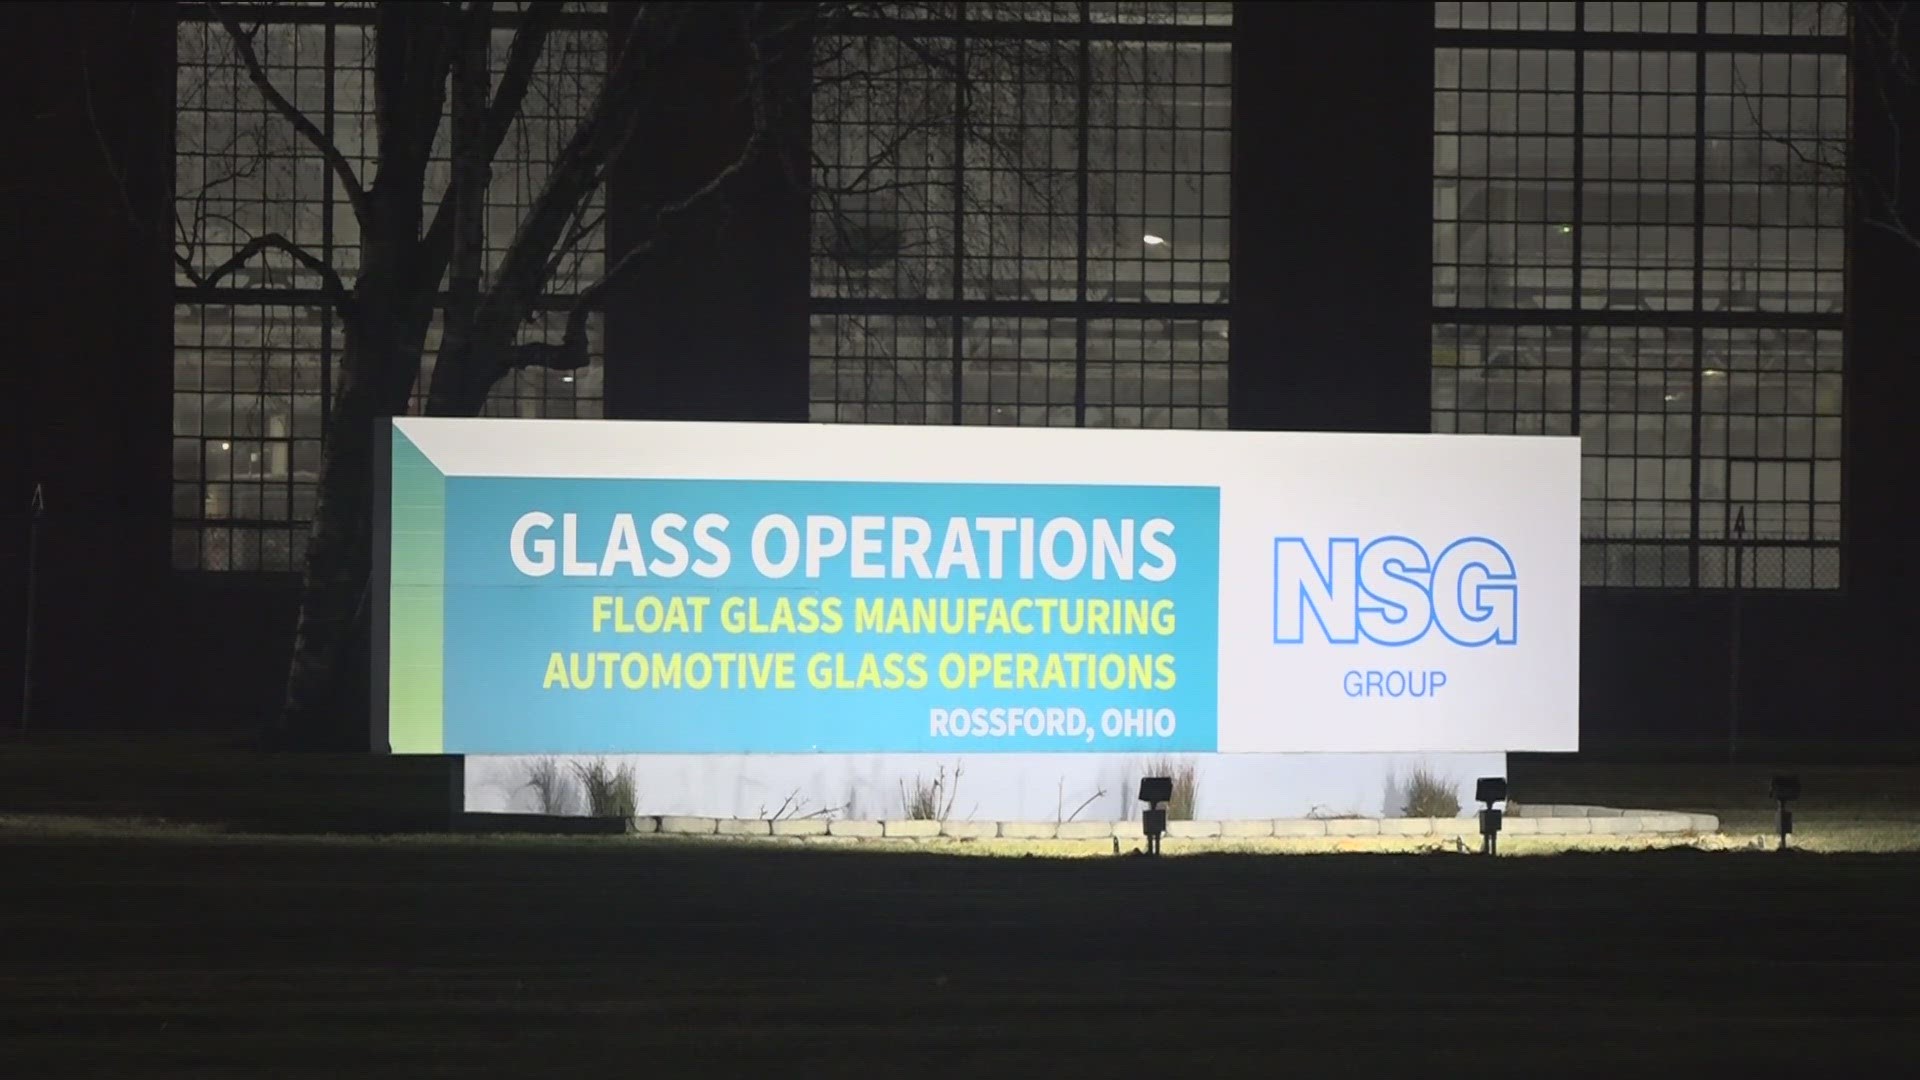 While Toledo may be known as the Glass City, Pilkington North America has plans that would bring solar glass panel production and jobs to nearby Rossford.